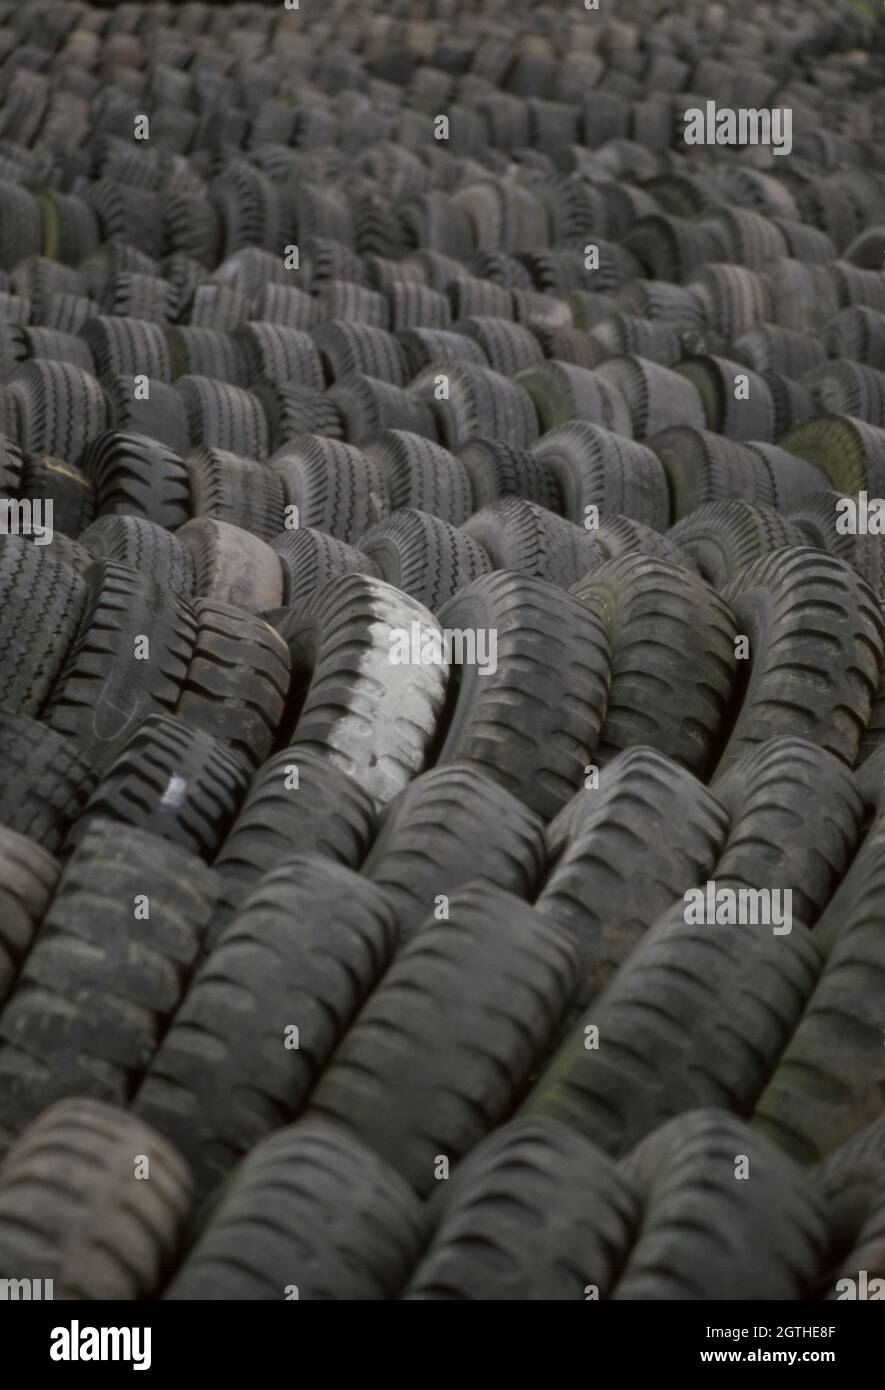 Dumped tires far out in the woods. Stock Photo